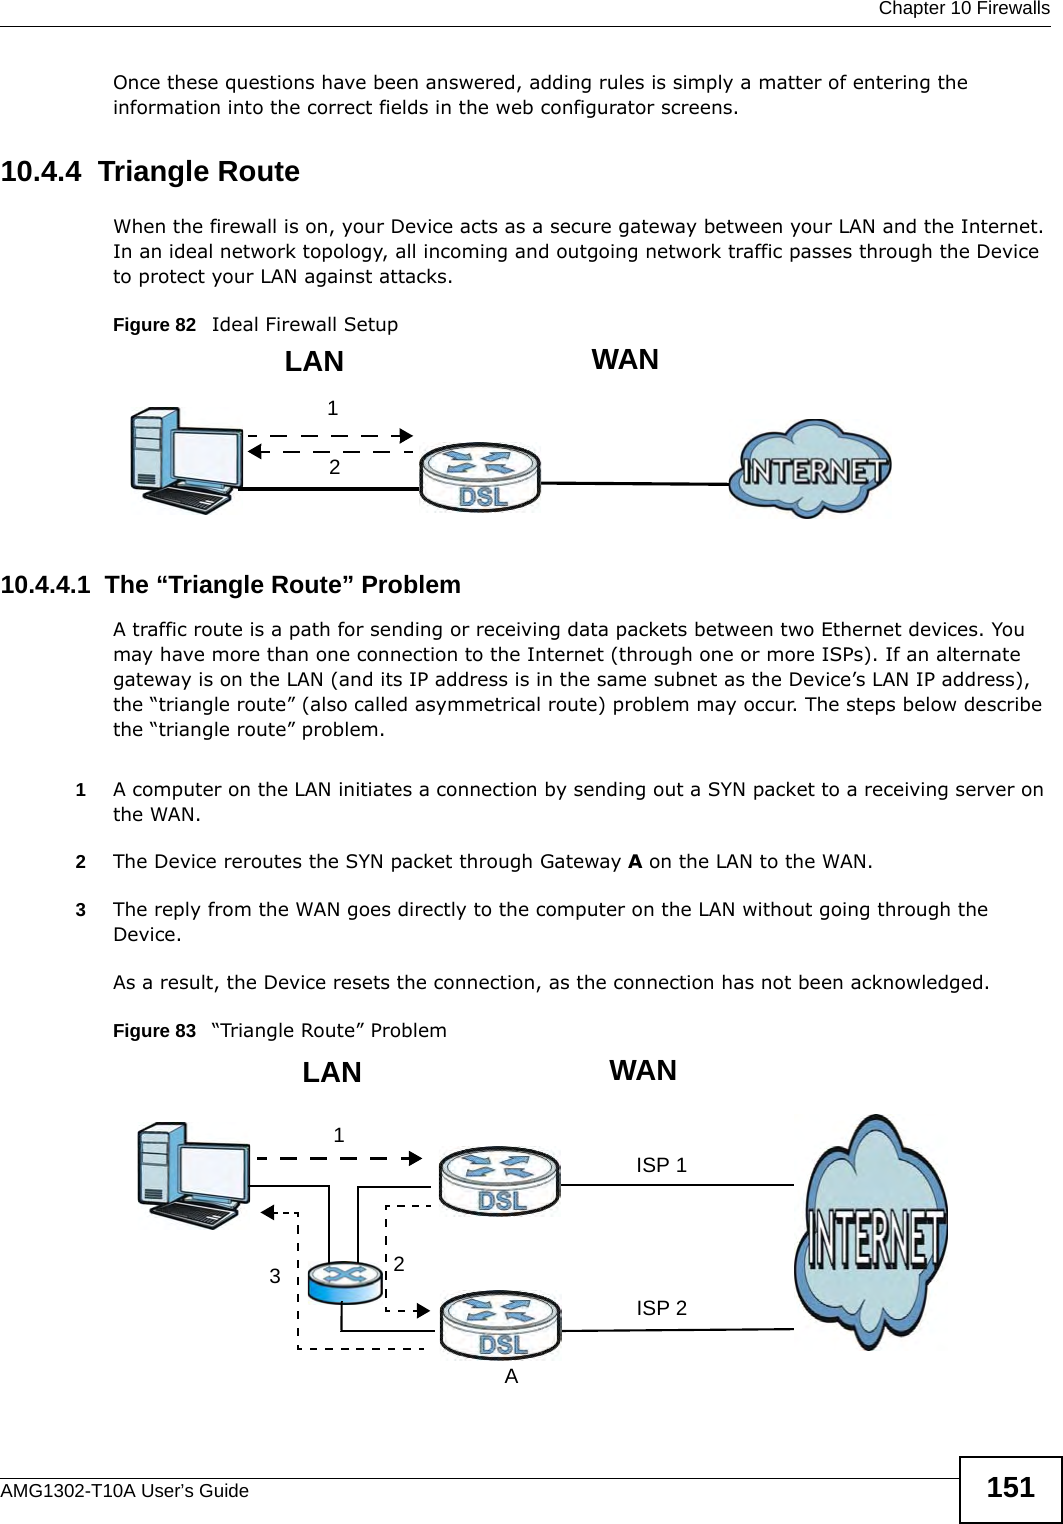  Chapter 10 FirewallsAMG1302-T10A User’s Guide 151Once these questions have been answered, adding rules is simply a matter of entering the information into the correct fields in the web configurator screens.10.4.4  Triangle RouteWhen the firewall is on, your Device acts as a secure gateway between your LAN and the Internet. In an ideal network topology, all incoming and outgoing network traffic passes through the Device to protect your LAN against attacks.Figure 82   Ideal Firewall Setup10.4.4.1  The “Triangle Route” ProblemA traffic route is a path for sending or receiving data packets between two Ethernet devices. You may have more than one connection to the Internet (through one or more ISPs). If an alternate gateway is on the LAN (and its IP address is in the same subnet as the Device’s LAN IP address), the “triangle route” (also called asymmetrical route) problem may occur. The steps below describe the “triangle route” problem. 1A computer on the LAN initiates a connection by sending out a SYN packet to a receiving server on the WAN.2The Device reroutes the SYN packet through Gateway A on the LAN to the WAN. 3The reply from the WAN goes directly to the computer on the LAN without going through the Device. As a result, the Device resets the connection, as the connection has not been acknowledged.Figure 83   “Triangle Route” Problem12WANLAN123WANLANAISP 1ISP 2